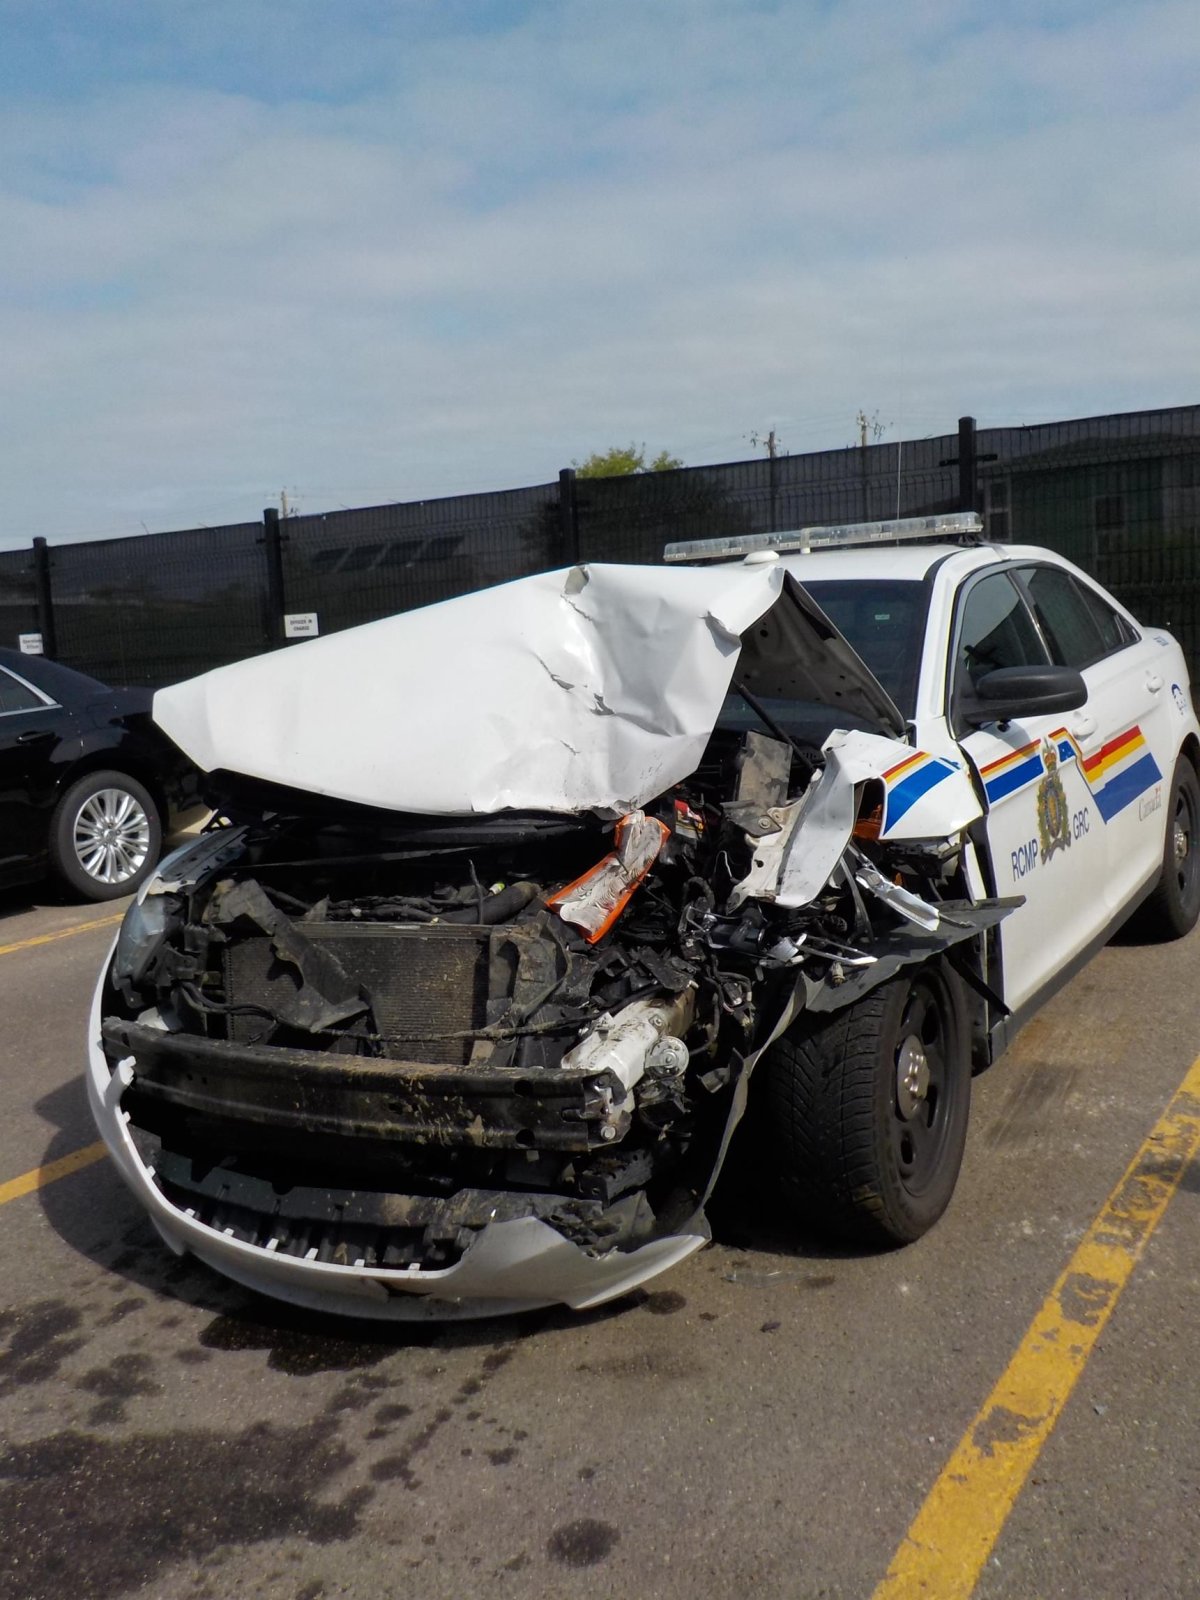 A Red Deer RCMP vehicle is damaged by a stolen truck, Monday, July 17, 2017. 